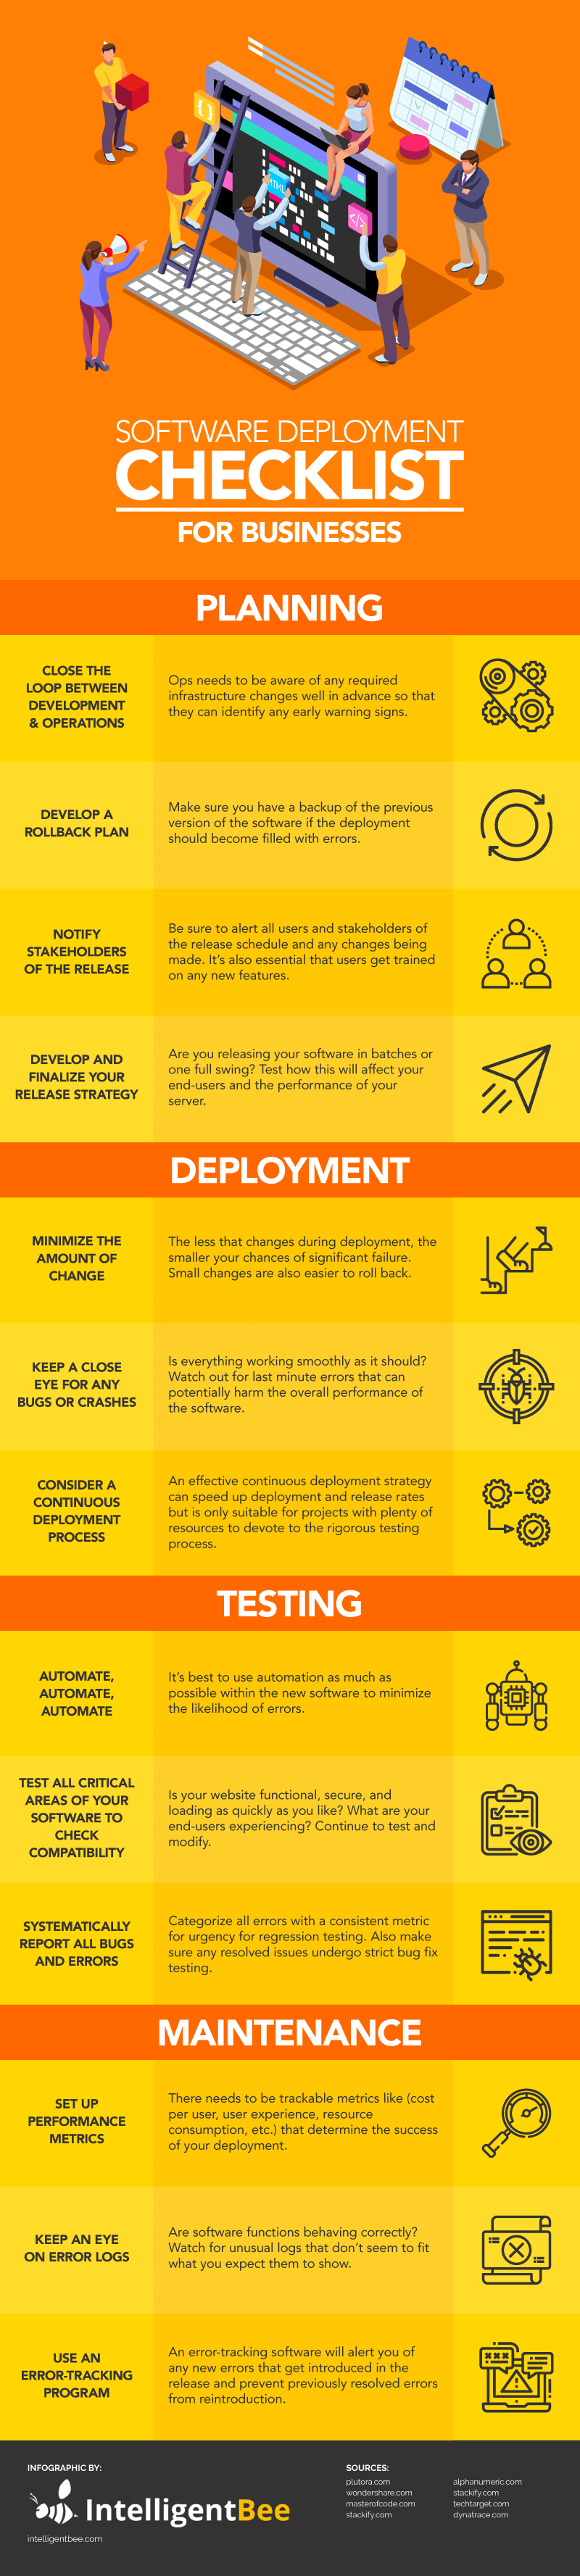 Software Deployment Checklist for Businesses